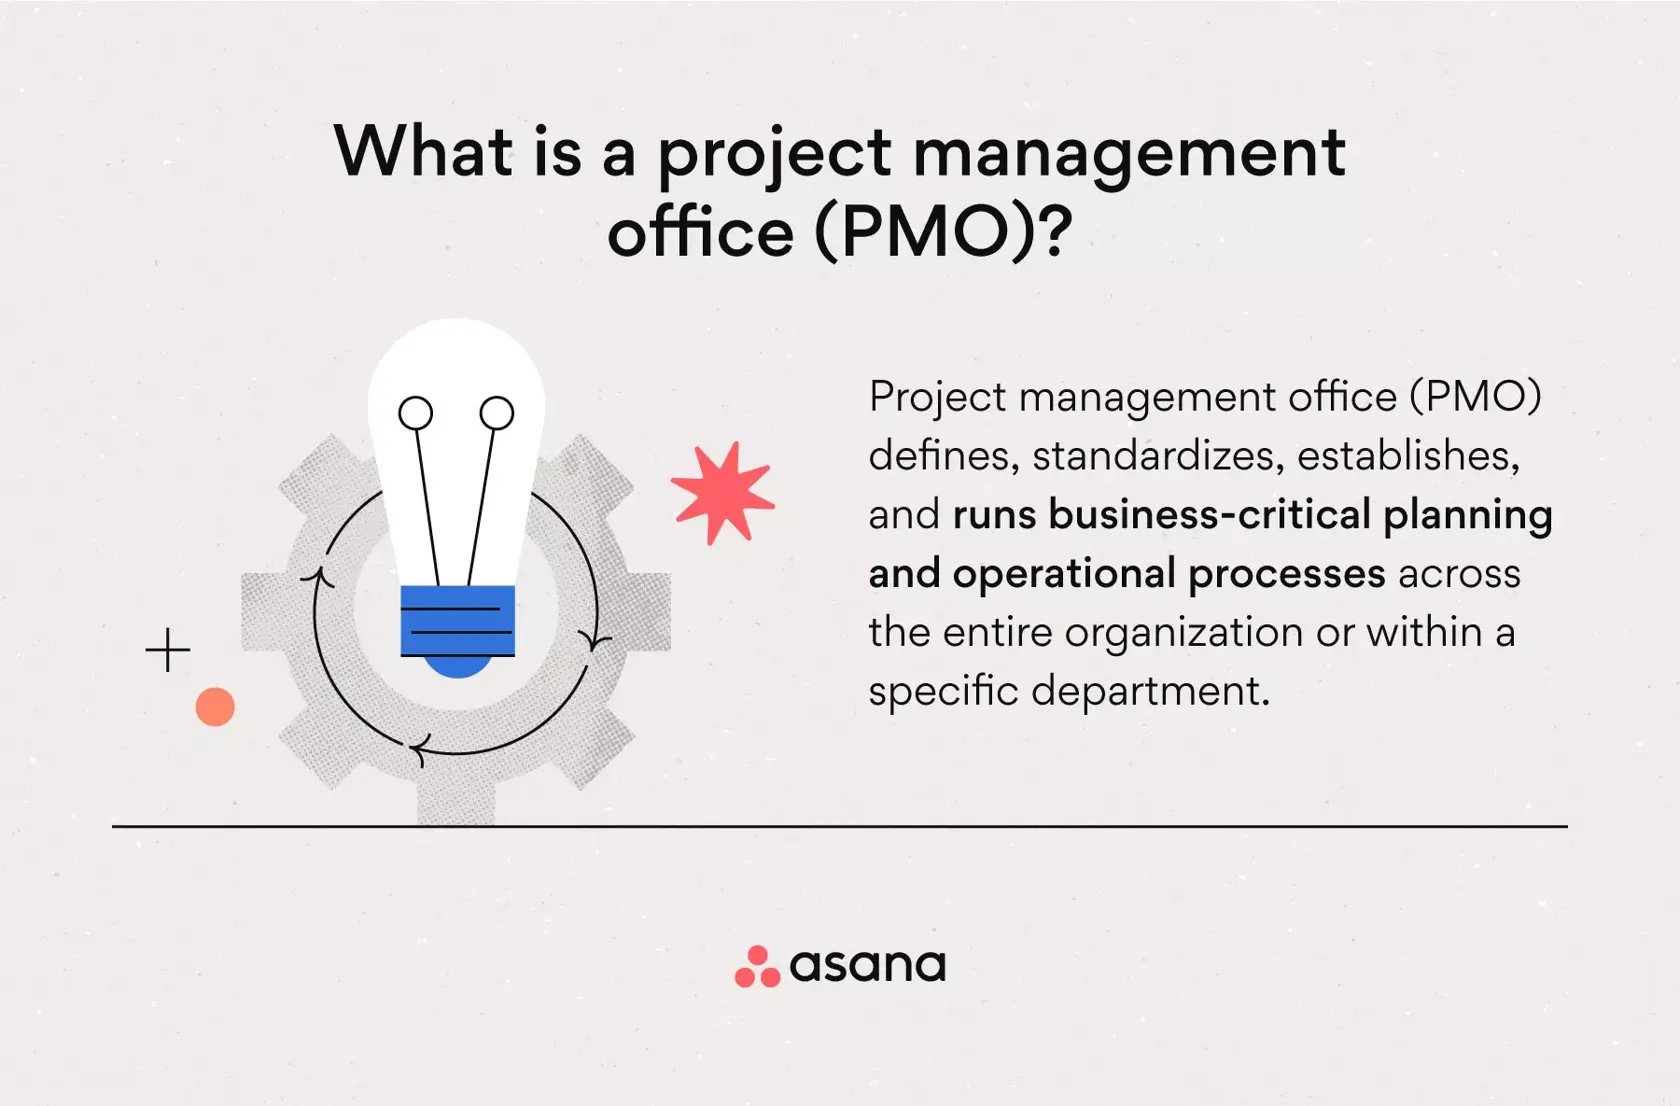 [Inline illustration] PMO project management office (infographic)